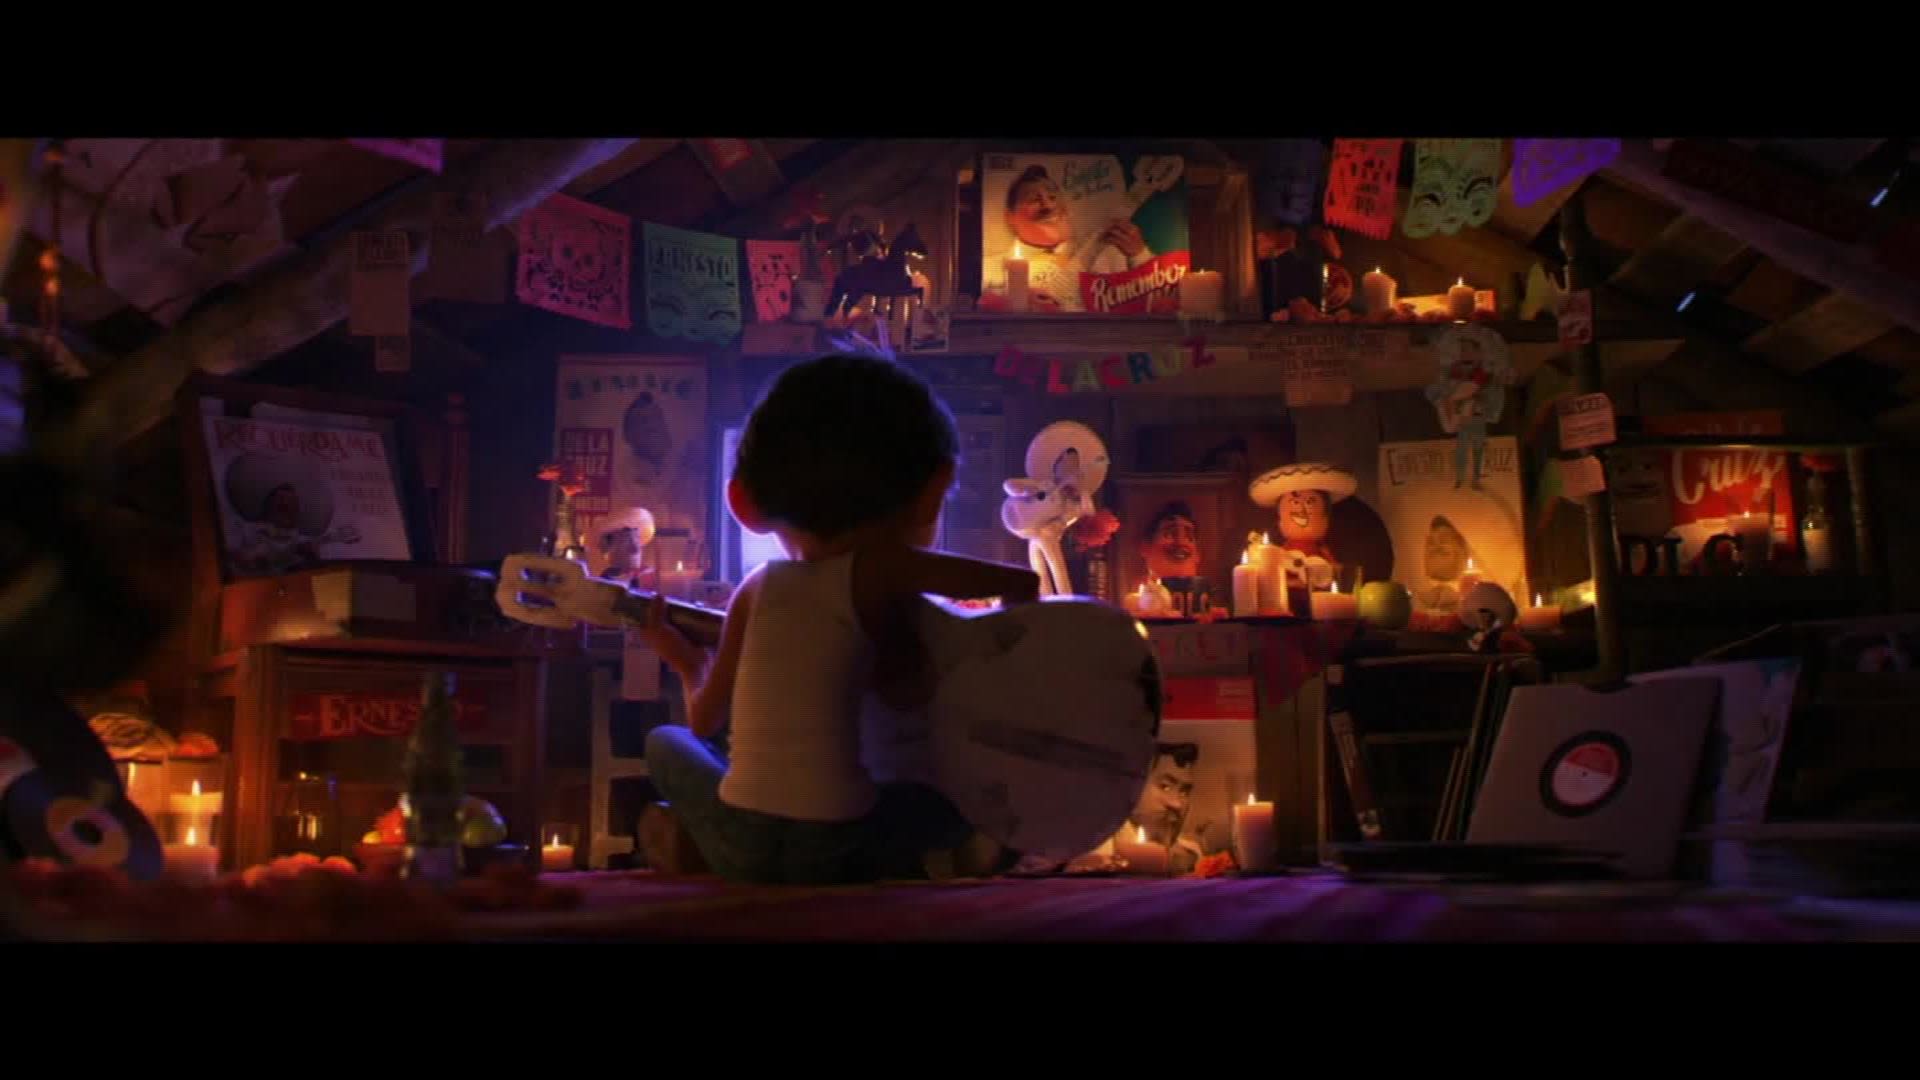 Coco' draws Latino audiences, others with theme of family